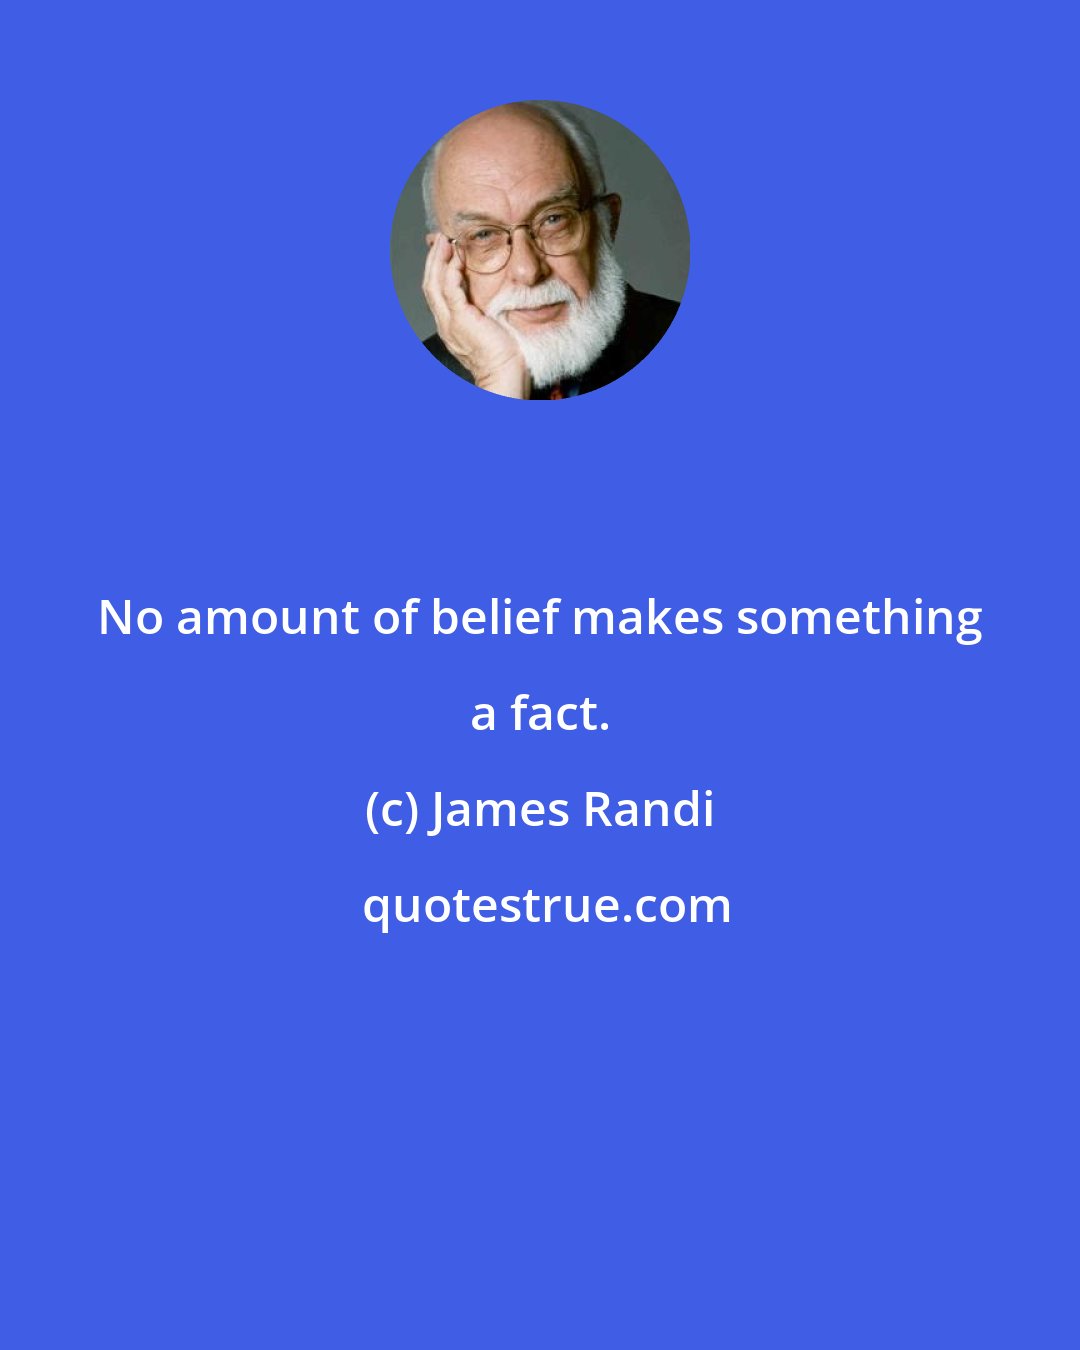 James Randi: No amount of belief makes something a fact.